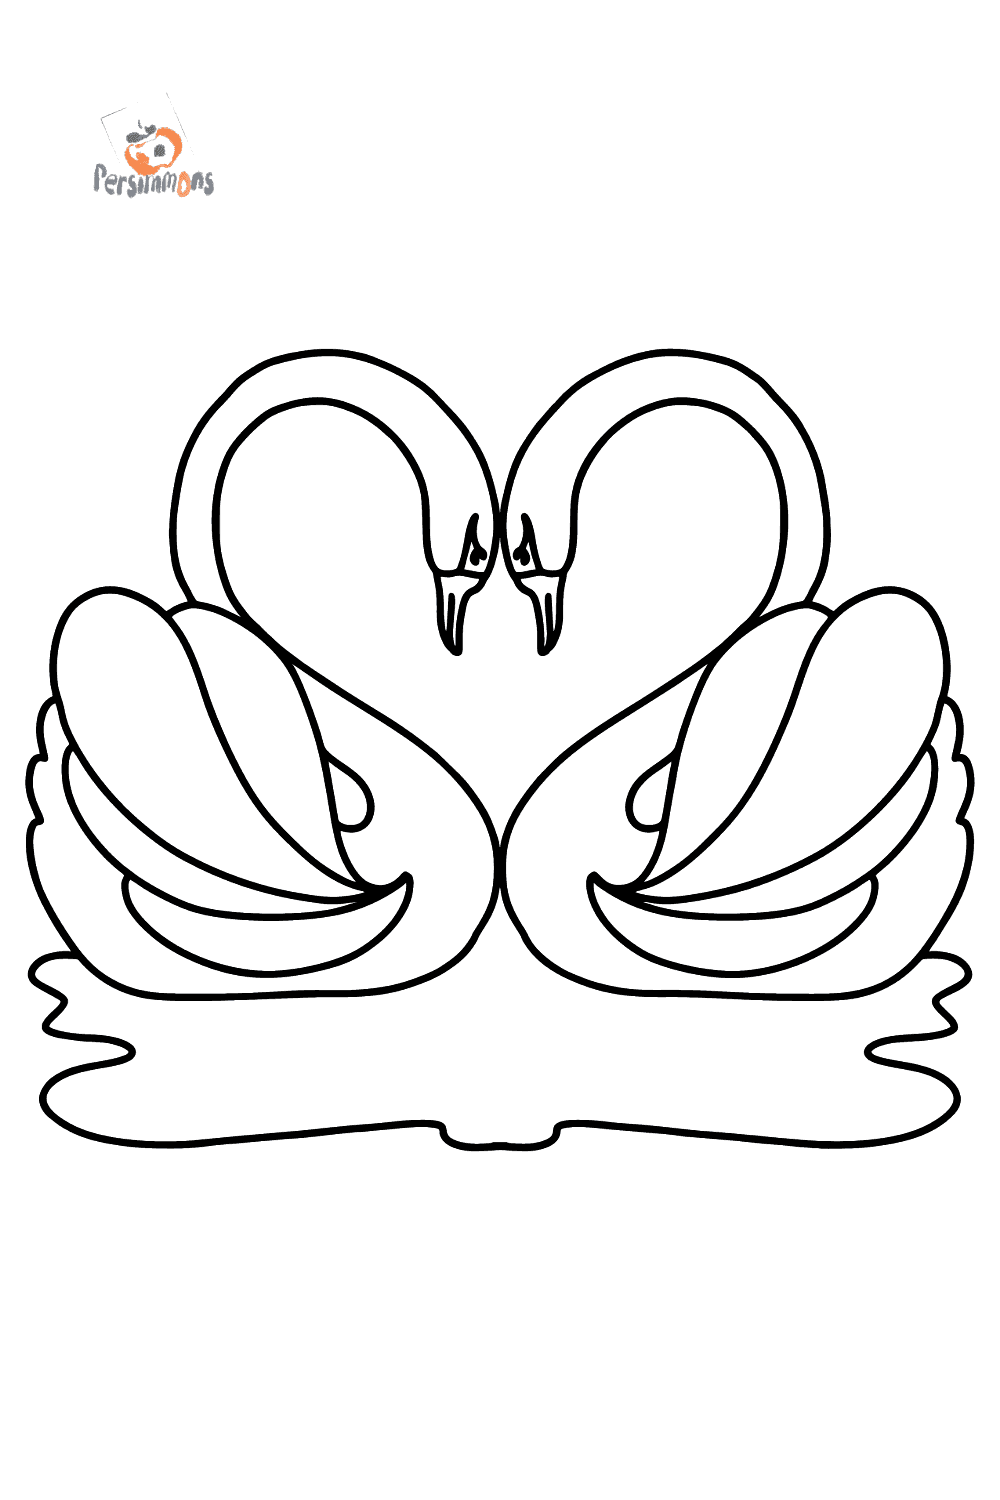 Black Swans coloring page ♥ Online or Printable for Free!